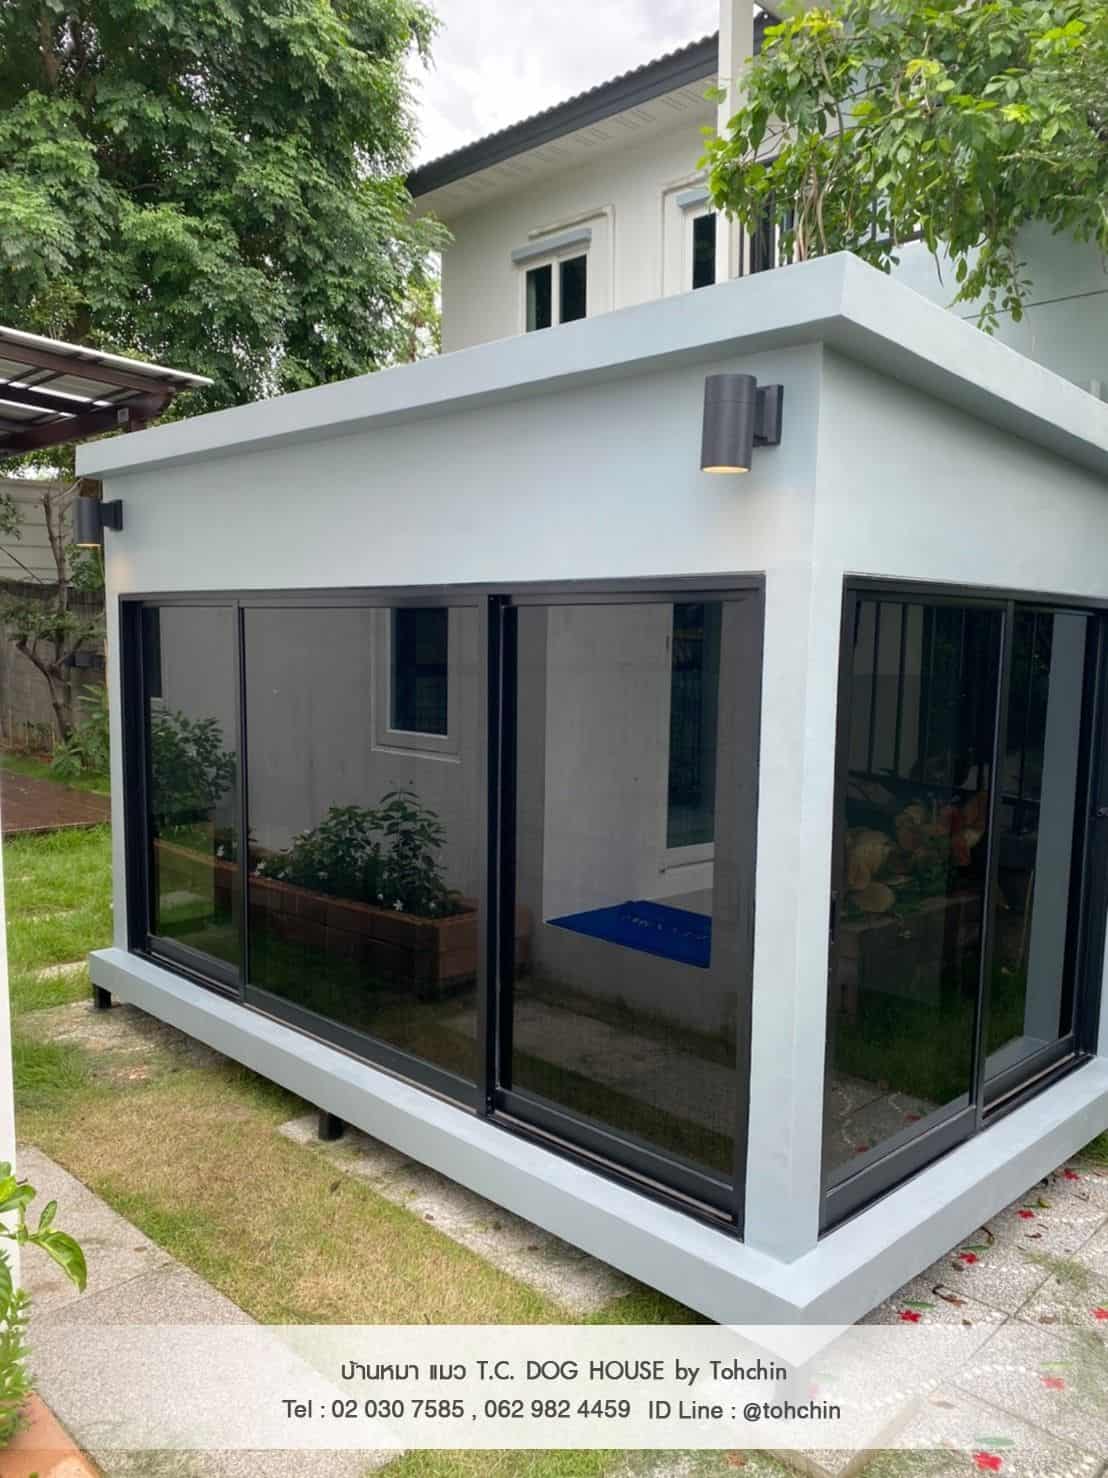 tcdoghouse_prefab_dog_house_extra_large_no_3_special_size (2)